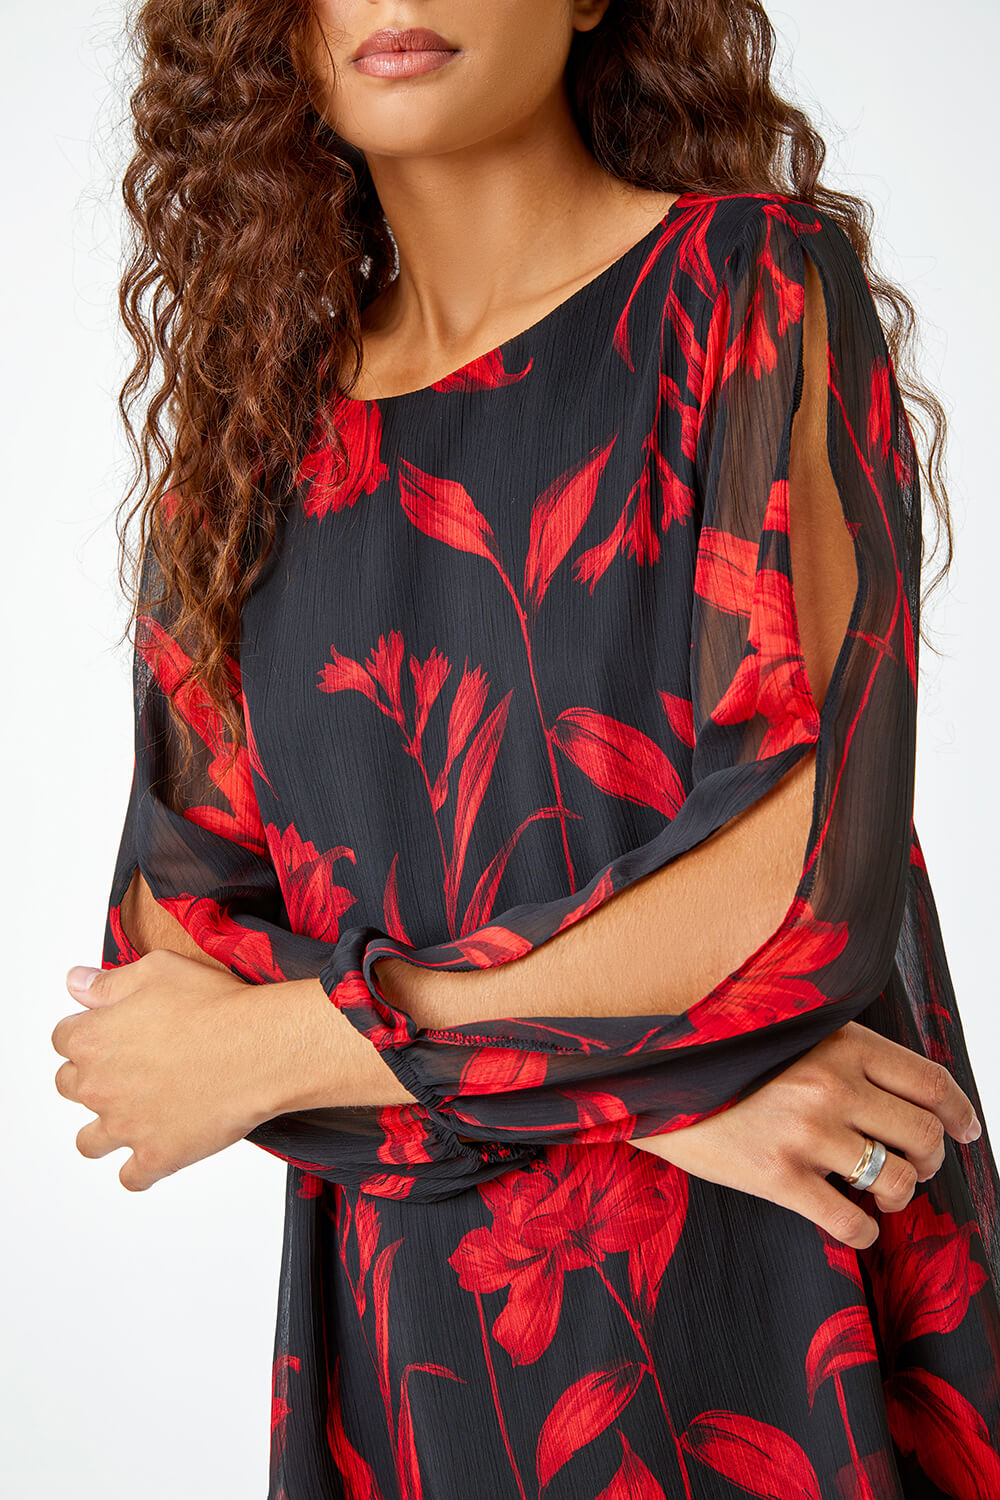 Red Floral Chiffon Layered Tunic Top, Image 5 of 5